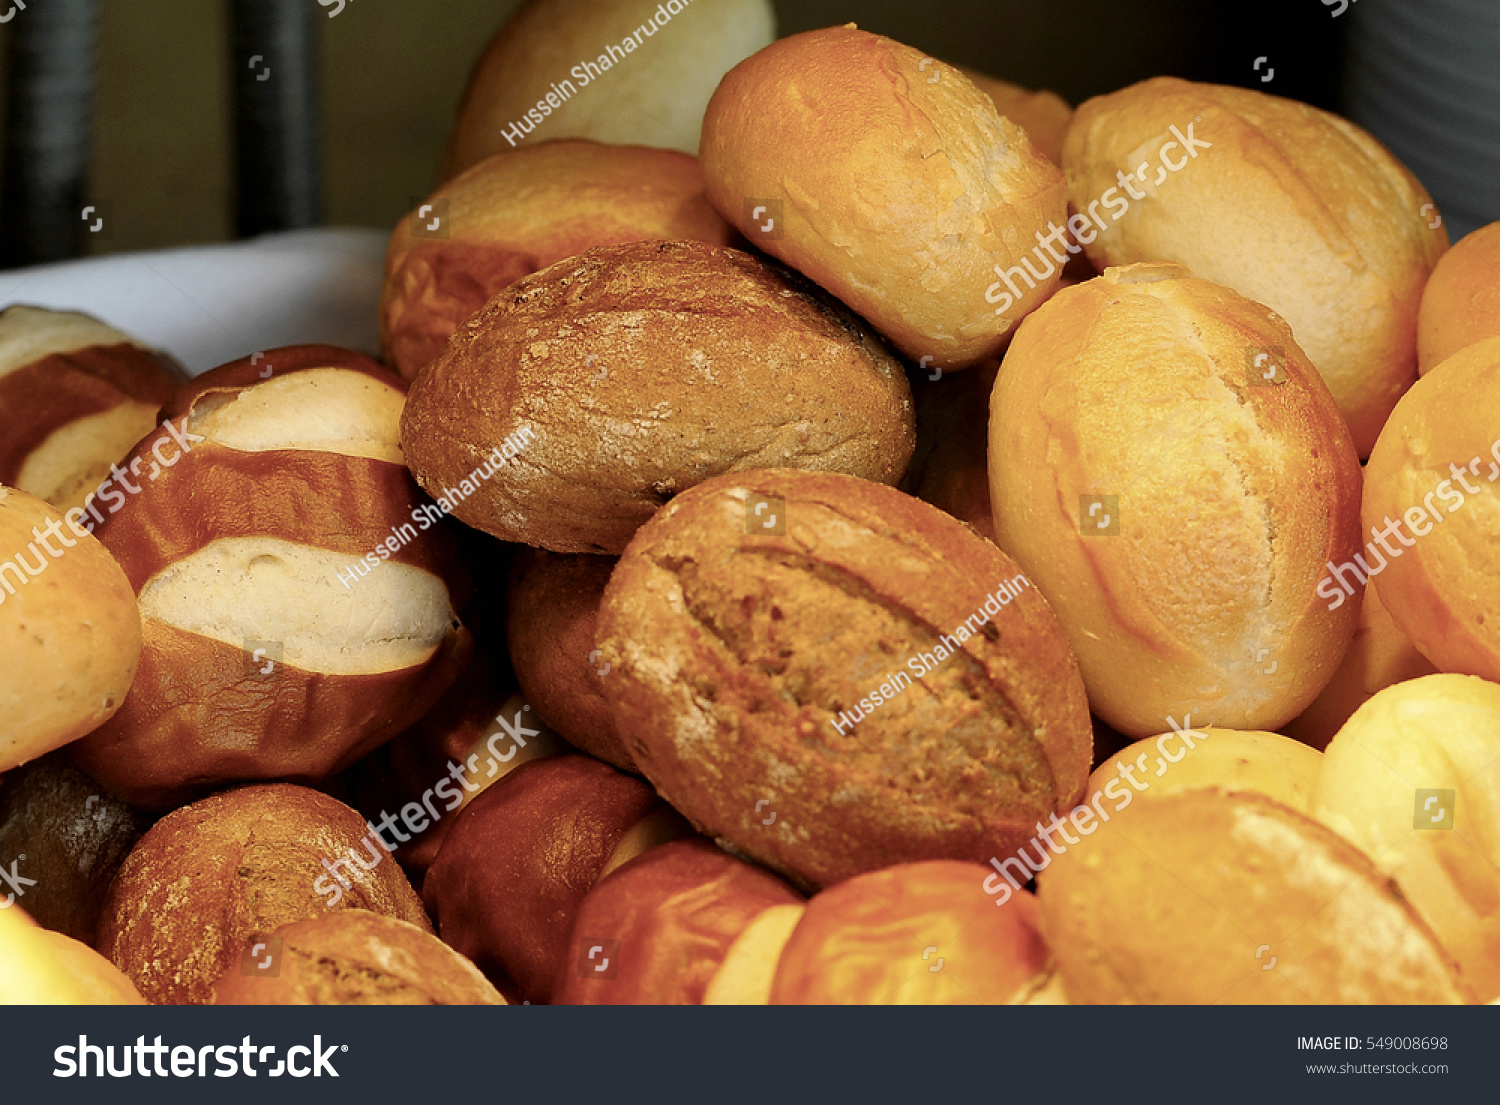 Assorted bread in a basket #549008698